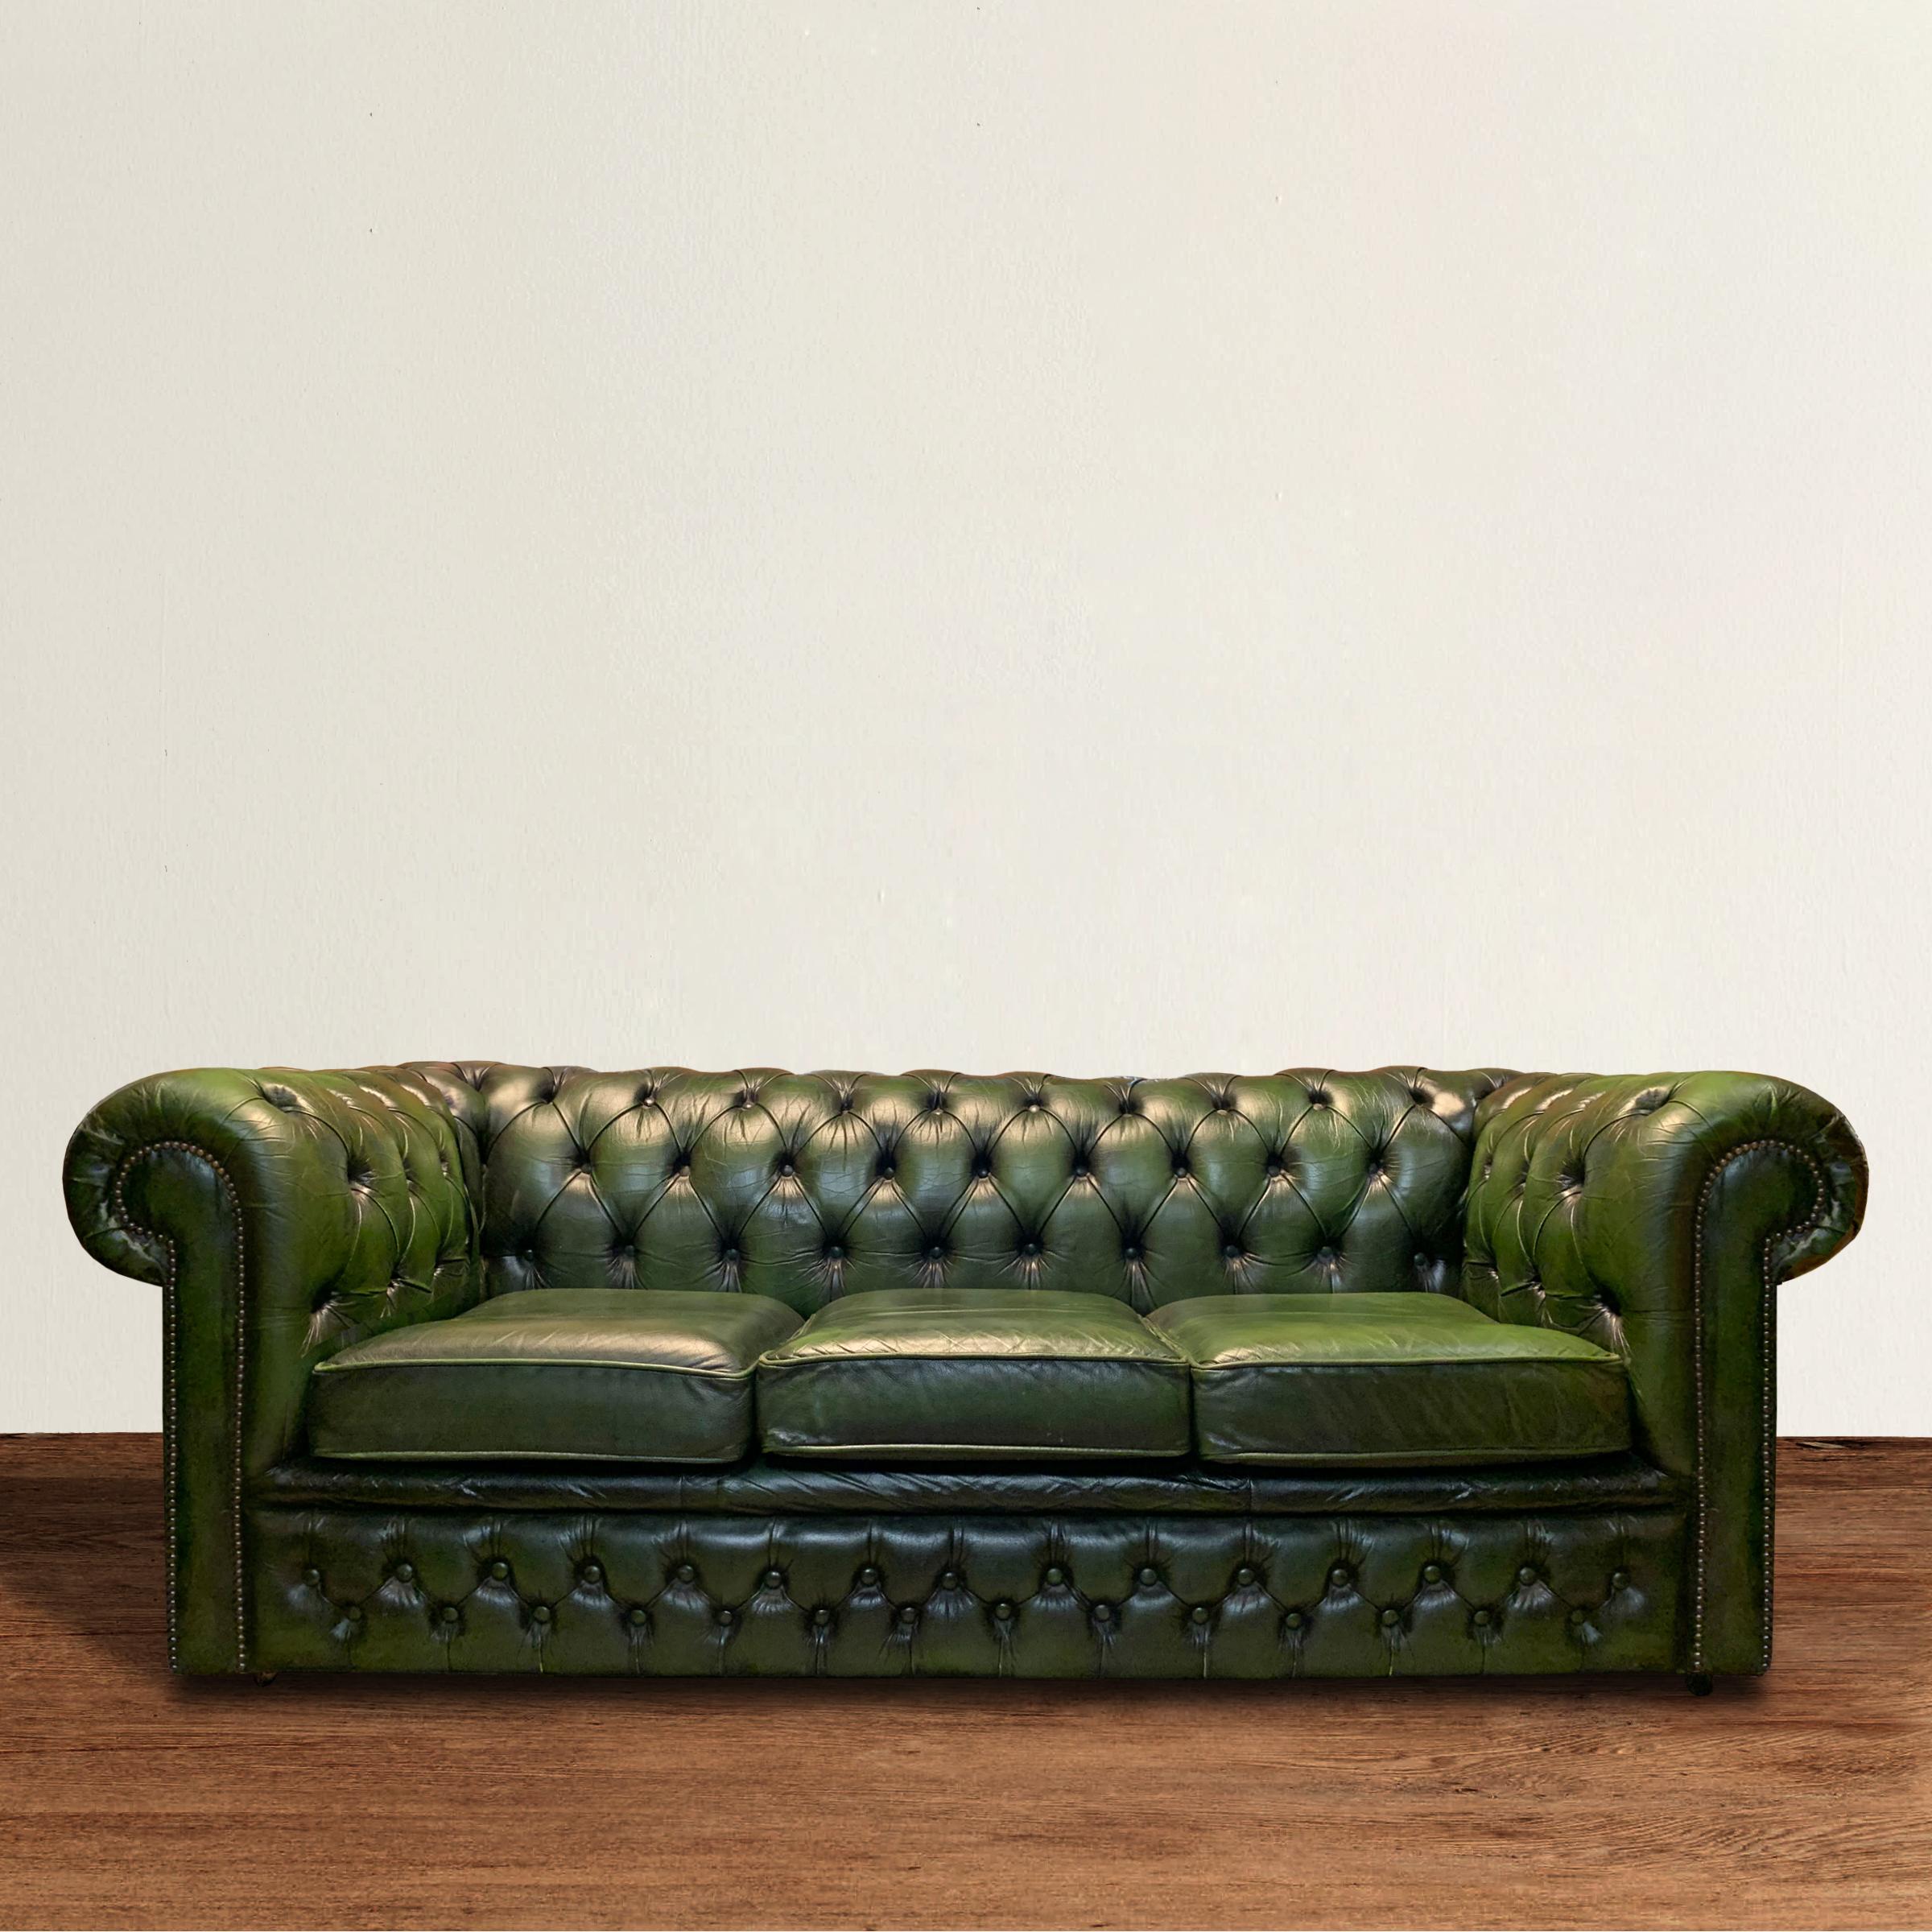 A quintessentially English mid-20th century emerald tufted Chesterfield sofa with a rich dark emerald green leather upholstery with three cushions, rolled and tufted arms and back, and a tufted front panel, all with brass nailhead trim. The sofa